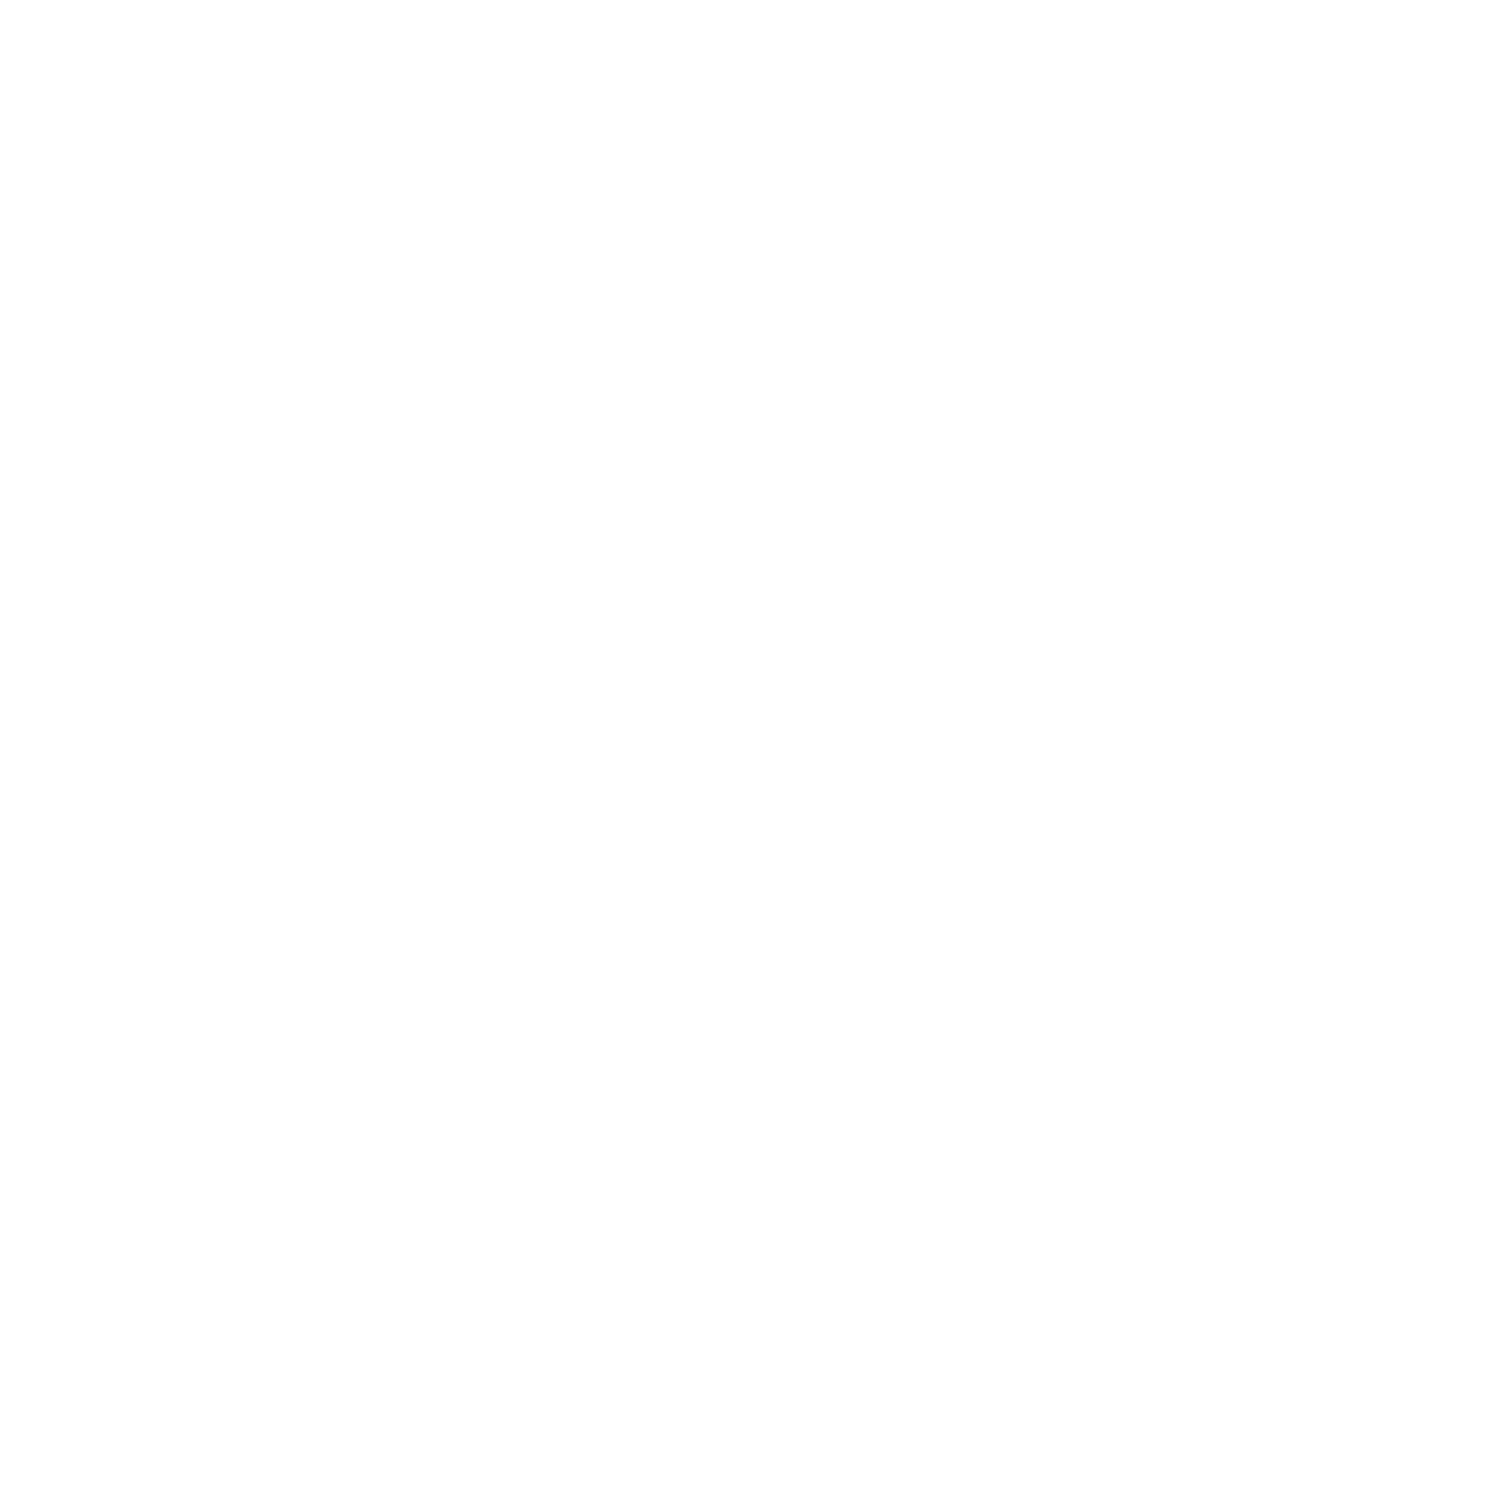 picture of the b and co branding logo